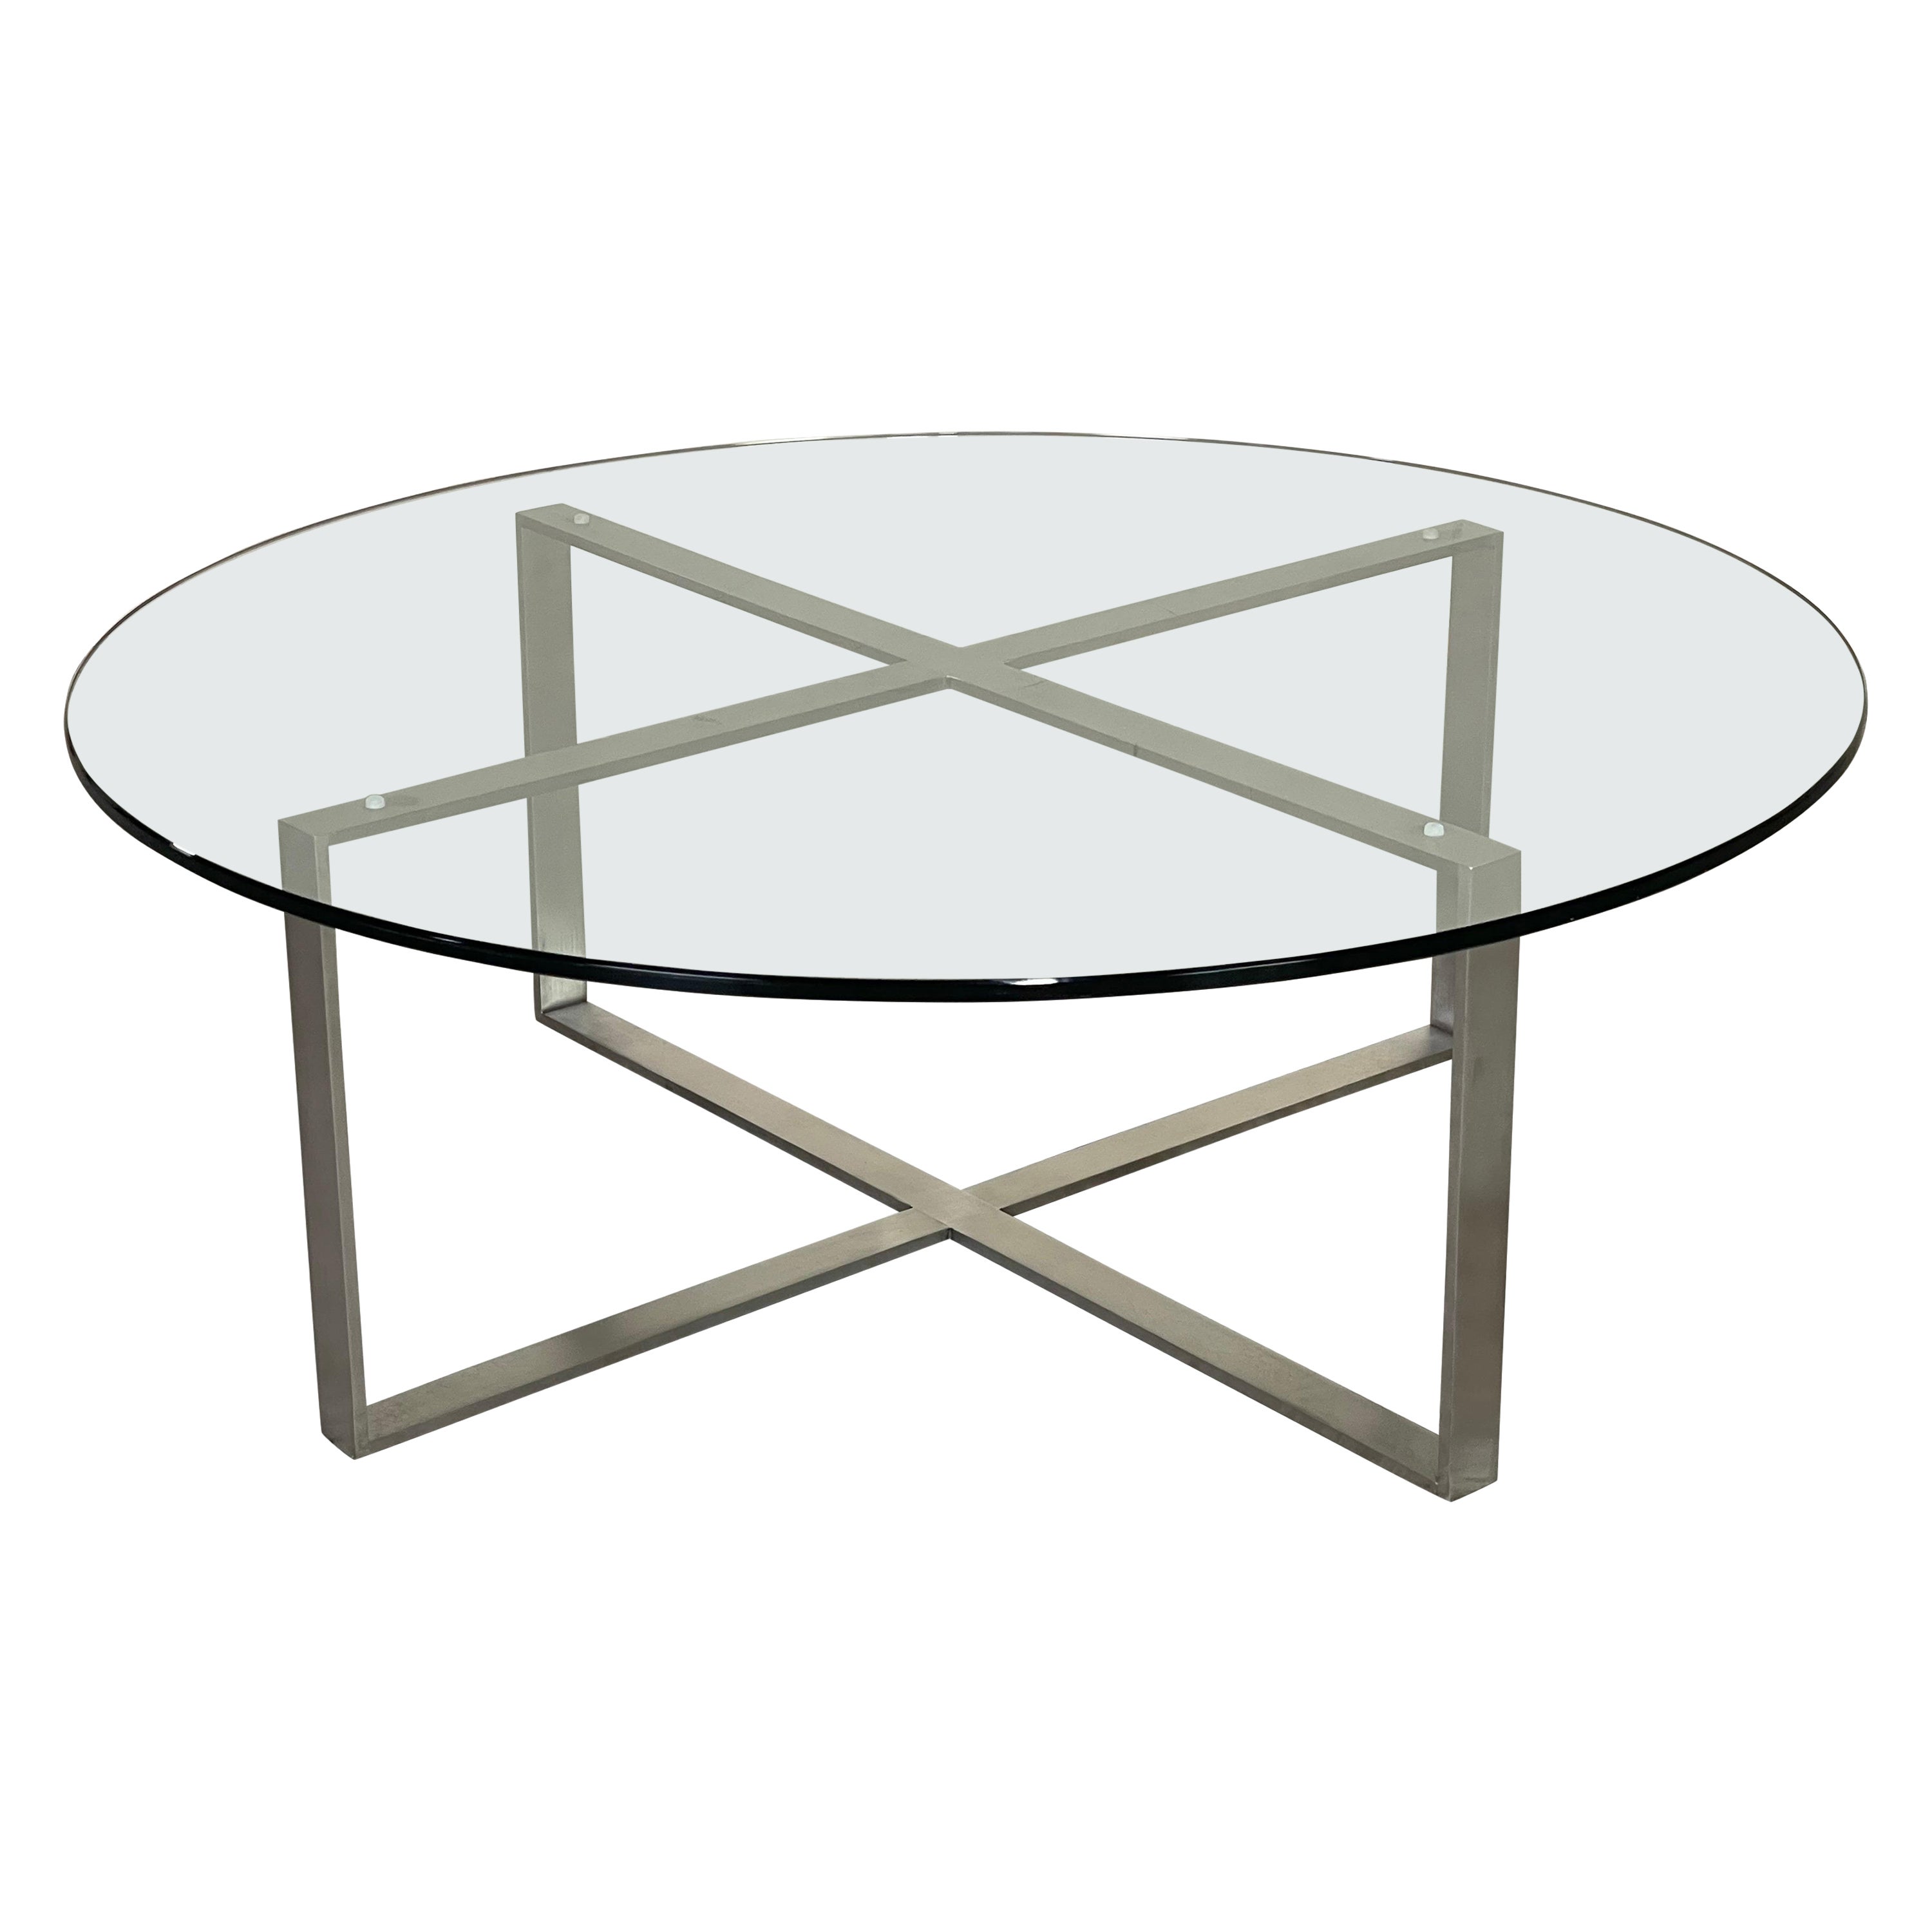 Mid-Century Modern Round Coffee Table in Stainless Steel and Glass by Bernhardt  For Sale